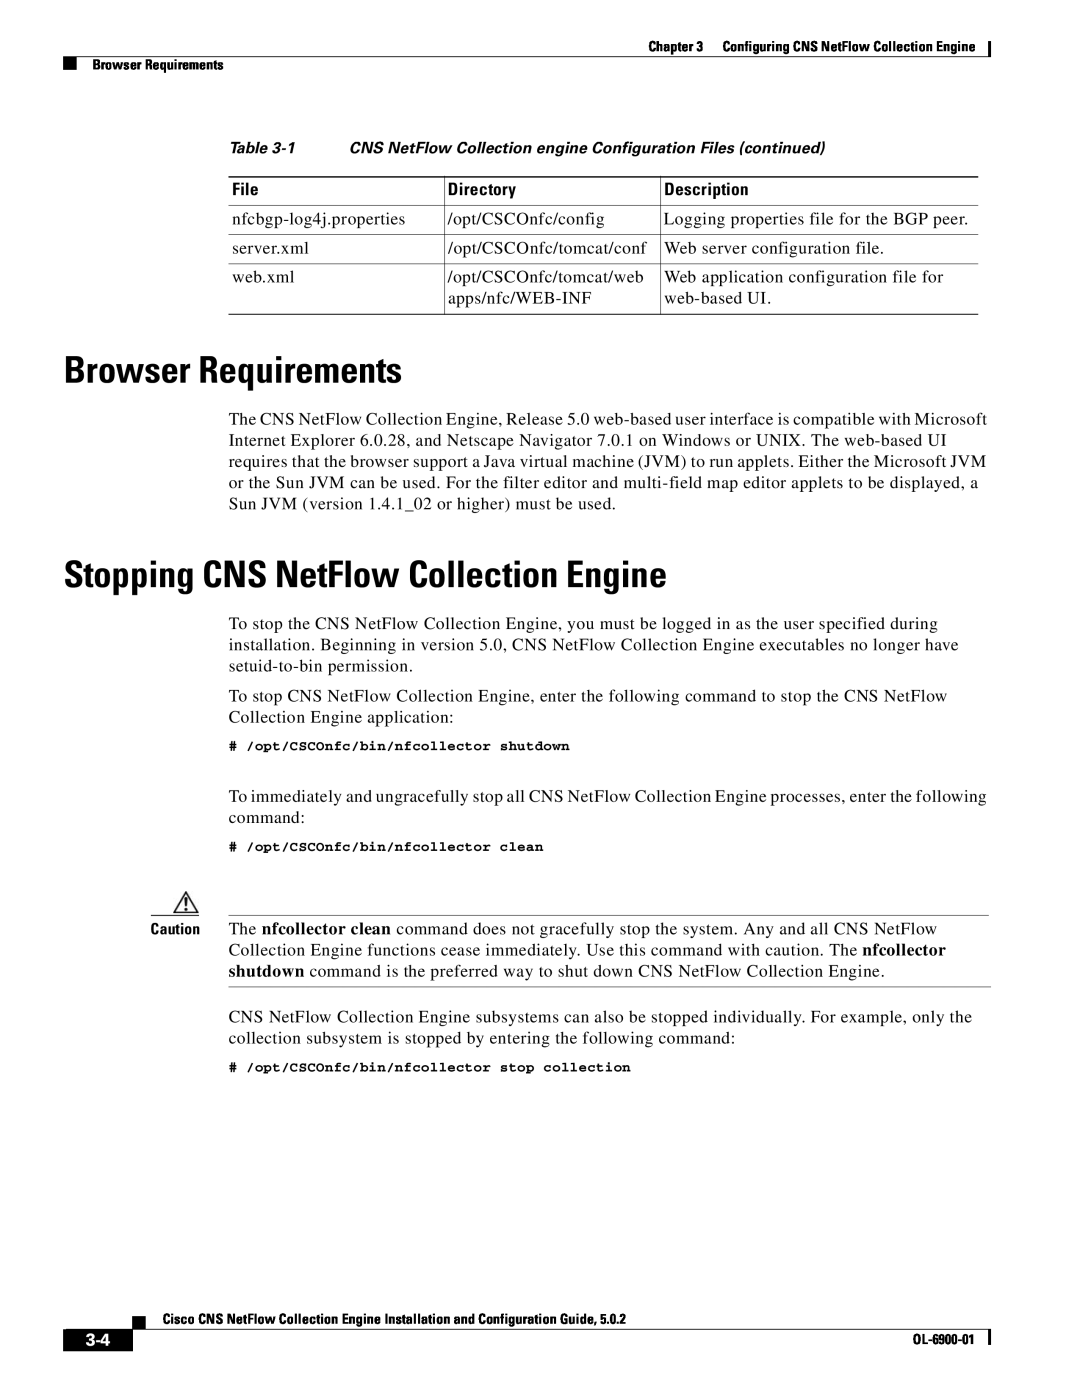 Cisco Systems OL-6900-01 manual Browser Requirements, Stopping CNS NetFlow Collection Engine, File, Directory, Description 